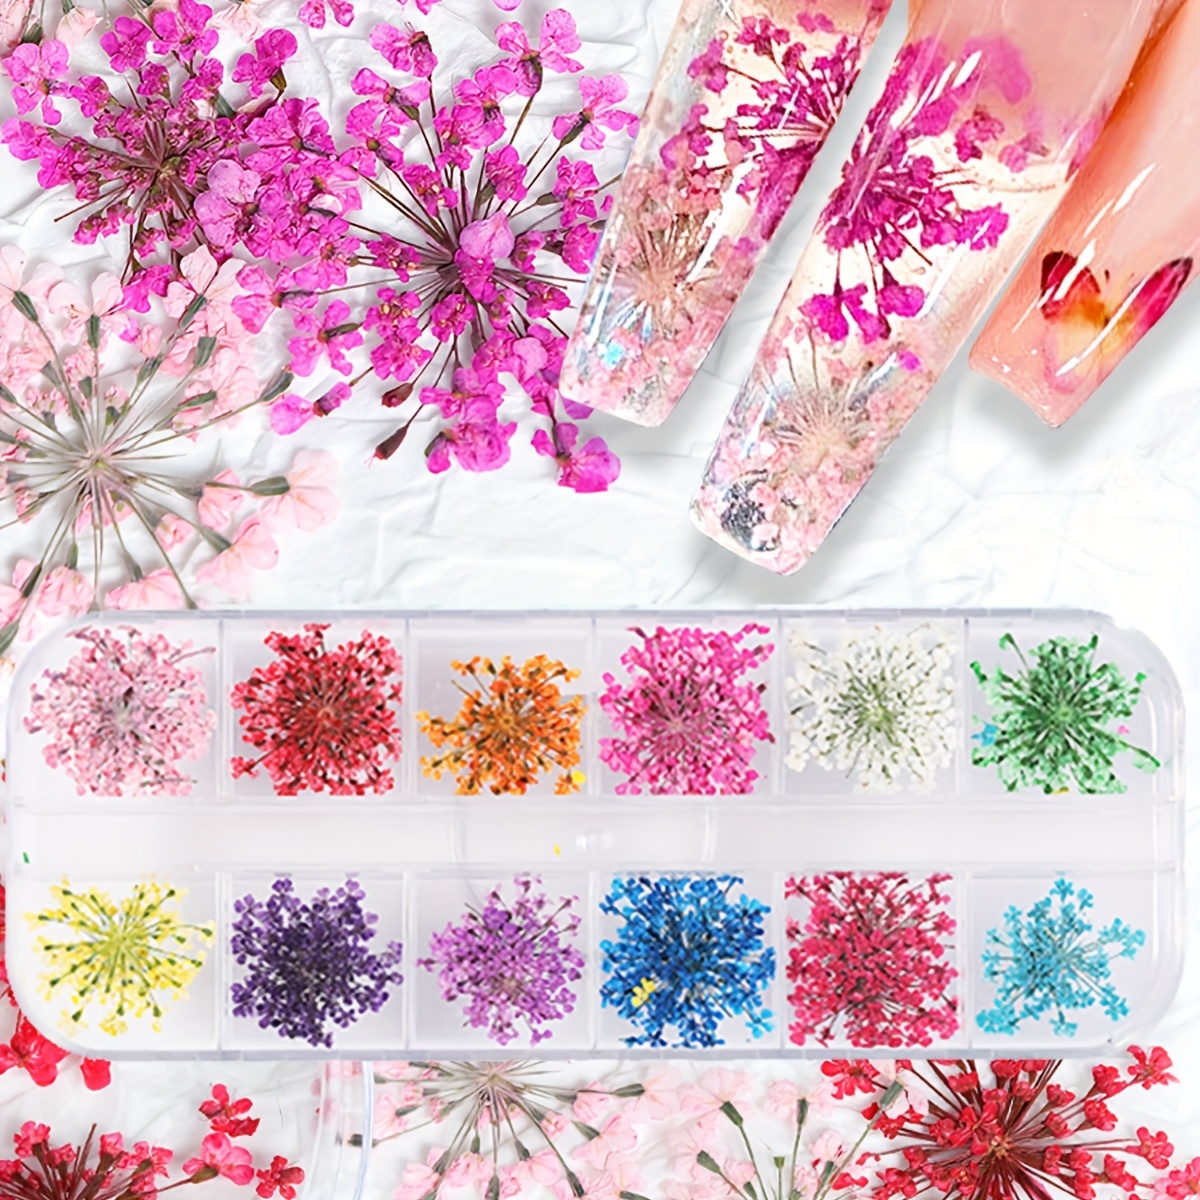 

12-piece Vibrant Dried Flower Nail Art Kit - Natural Floral Manicure Decorations, Non-fading, Self-adhesive, Sparkle Accents For Diy Nail Design